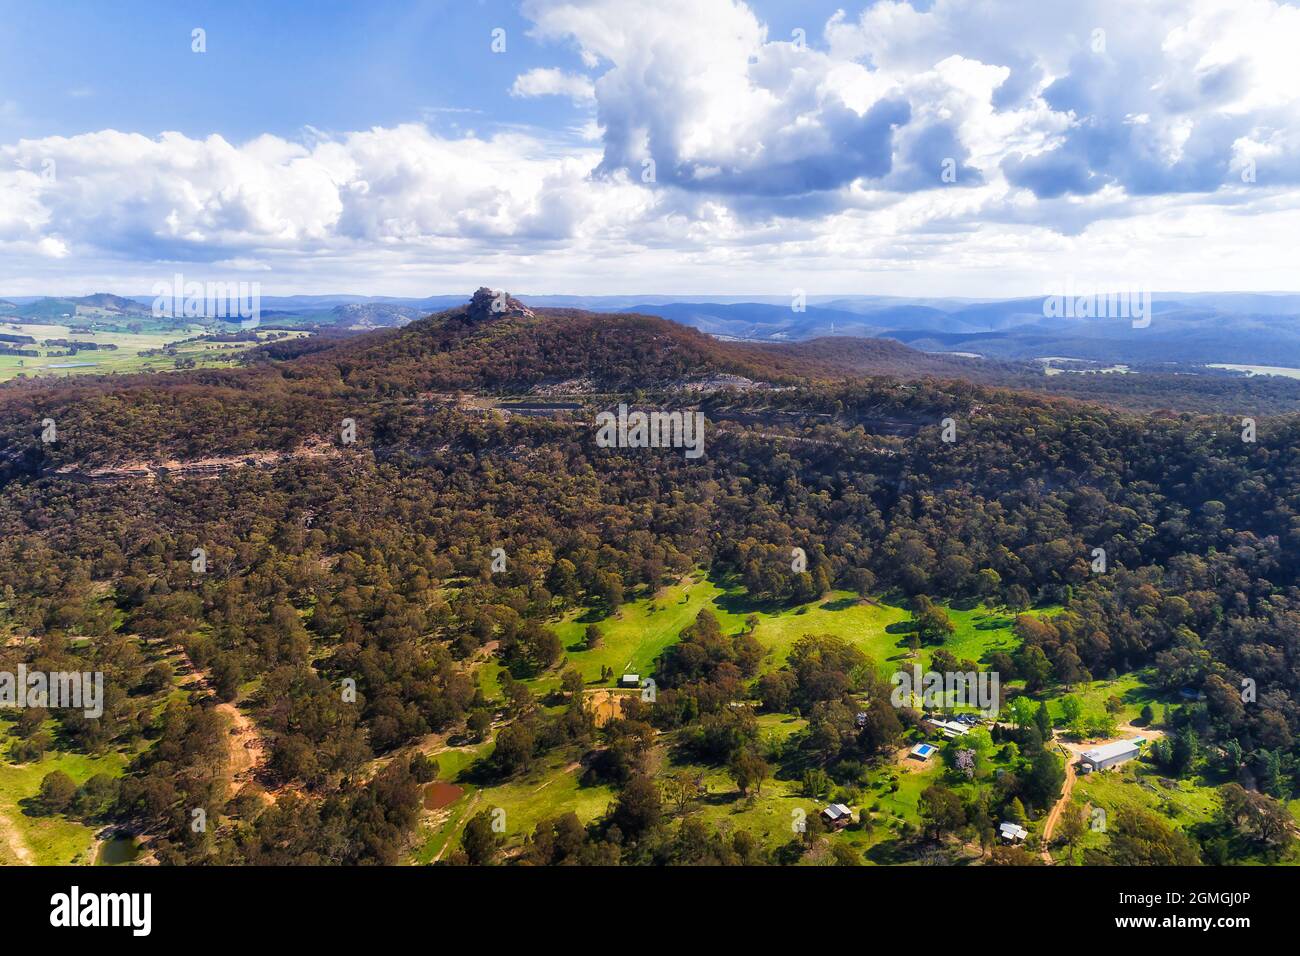 Pearsons lookout on Castlereagh highway in Capertee valley of NSW, Australia - scenic aerial landscape. Stock Photo